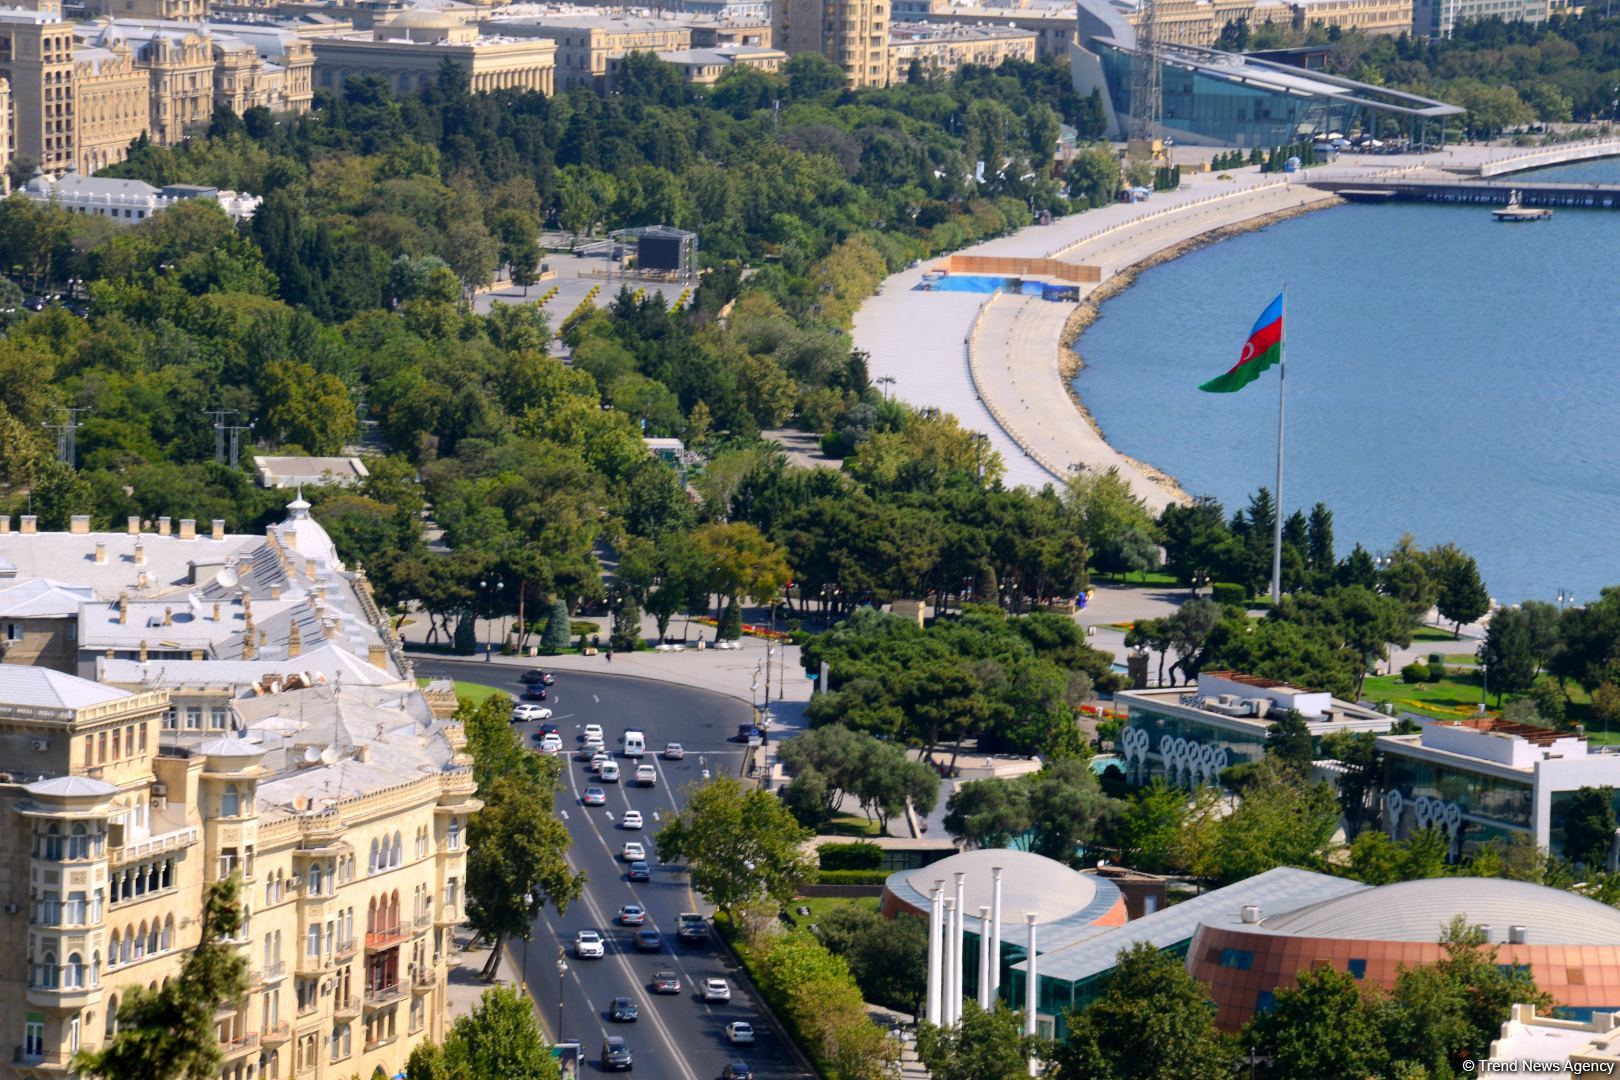 Azerbaijan's economic growth is result of reforms led by President Ilham Aliyev - experts